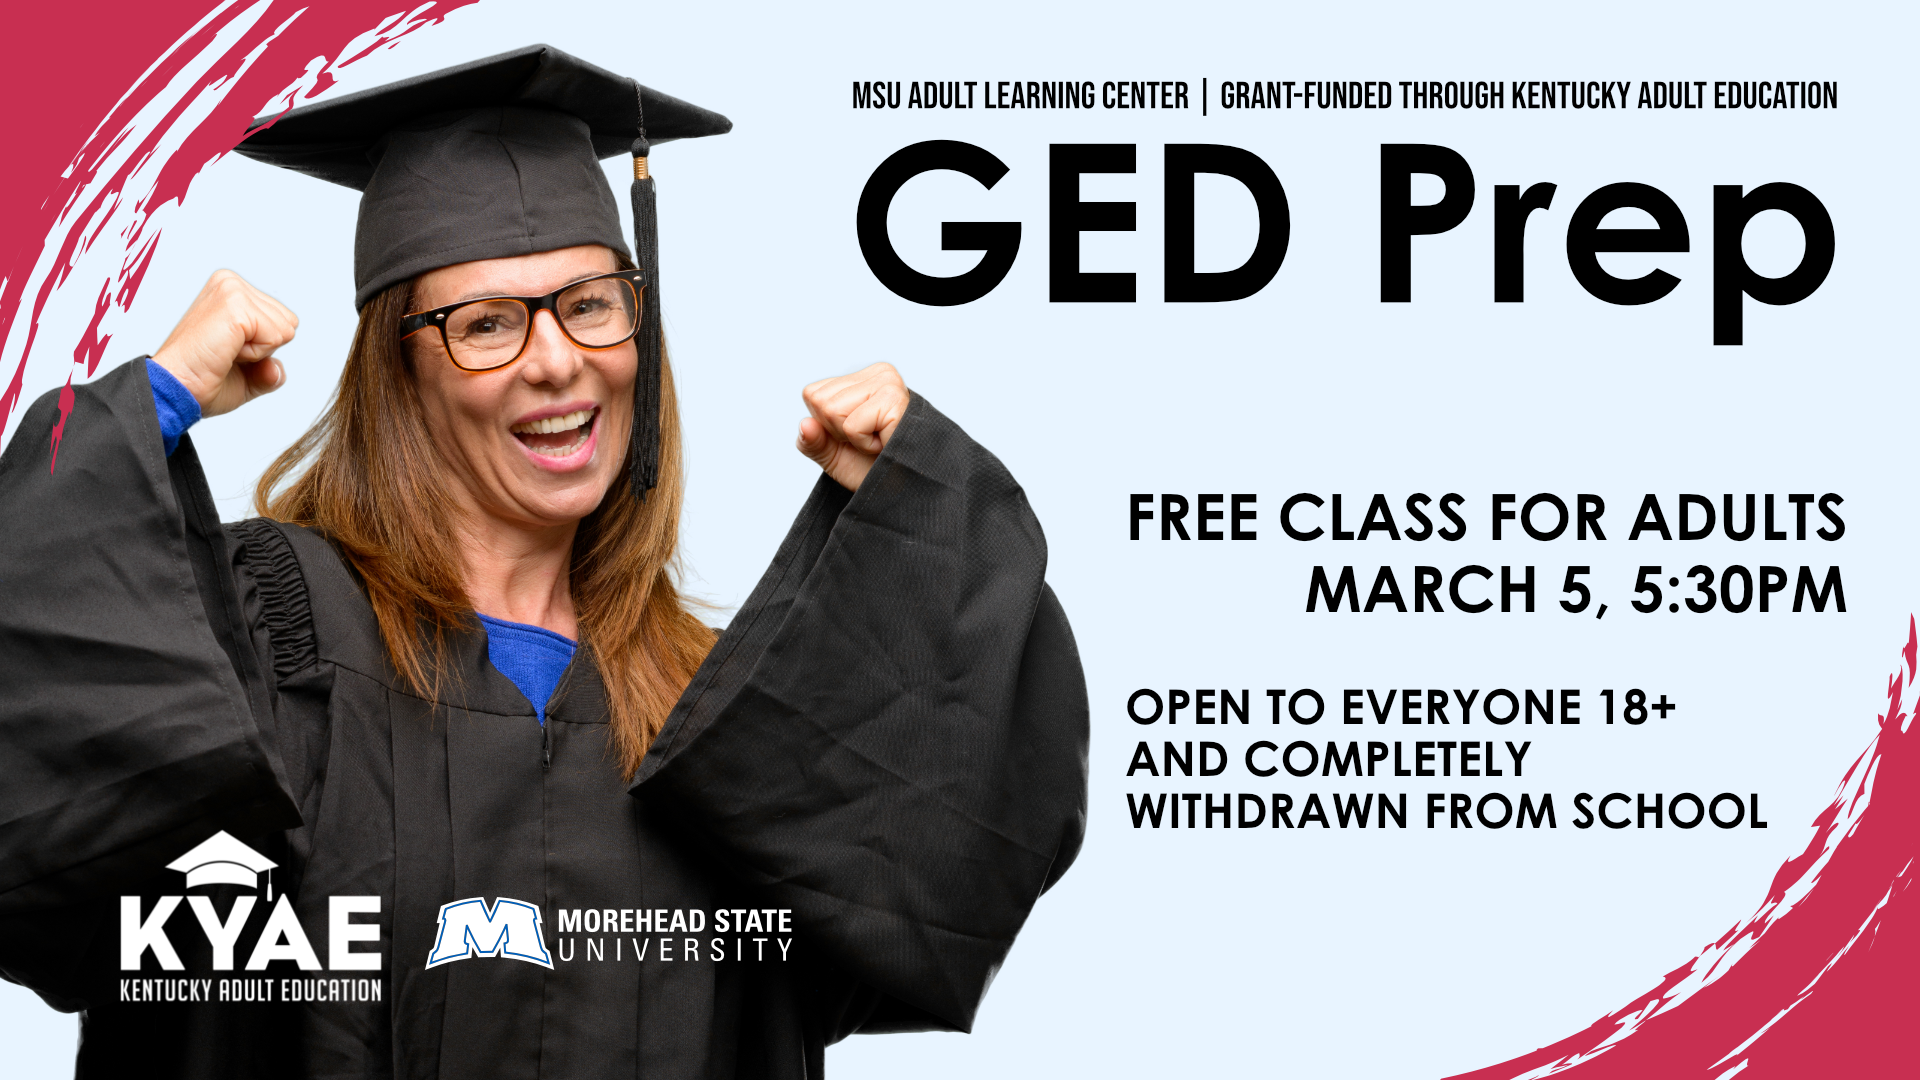 GED Prep, March 5th at 5:30pm, intended for everyone 18+ and withdrawn from school